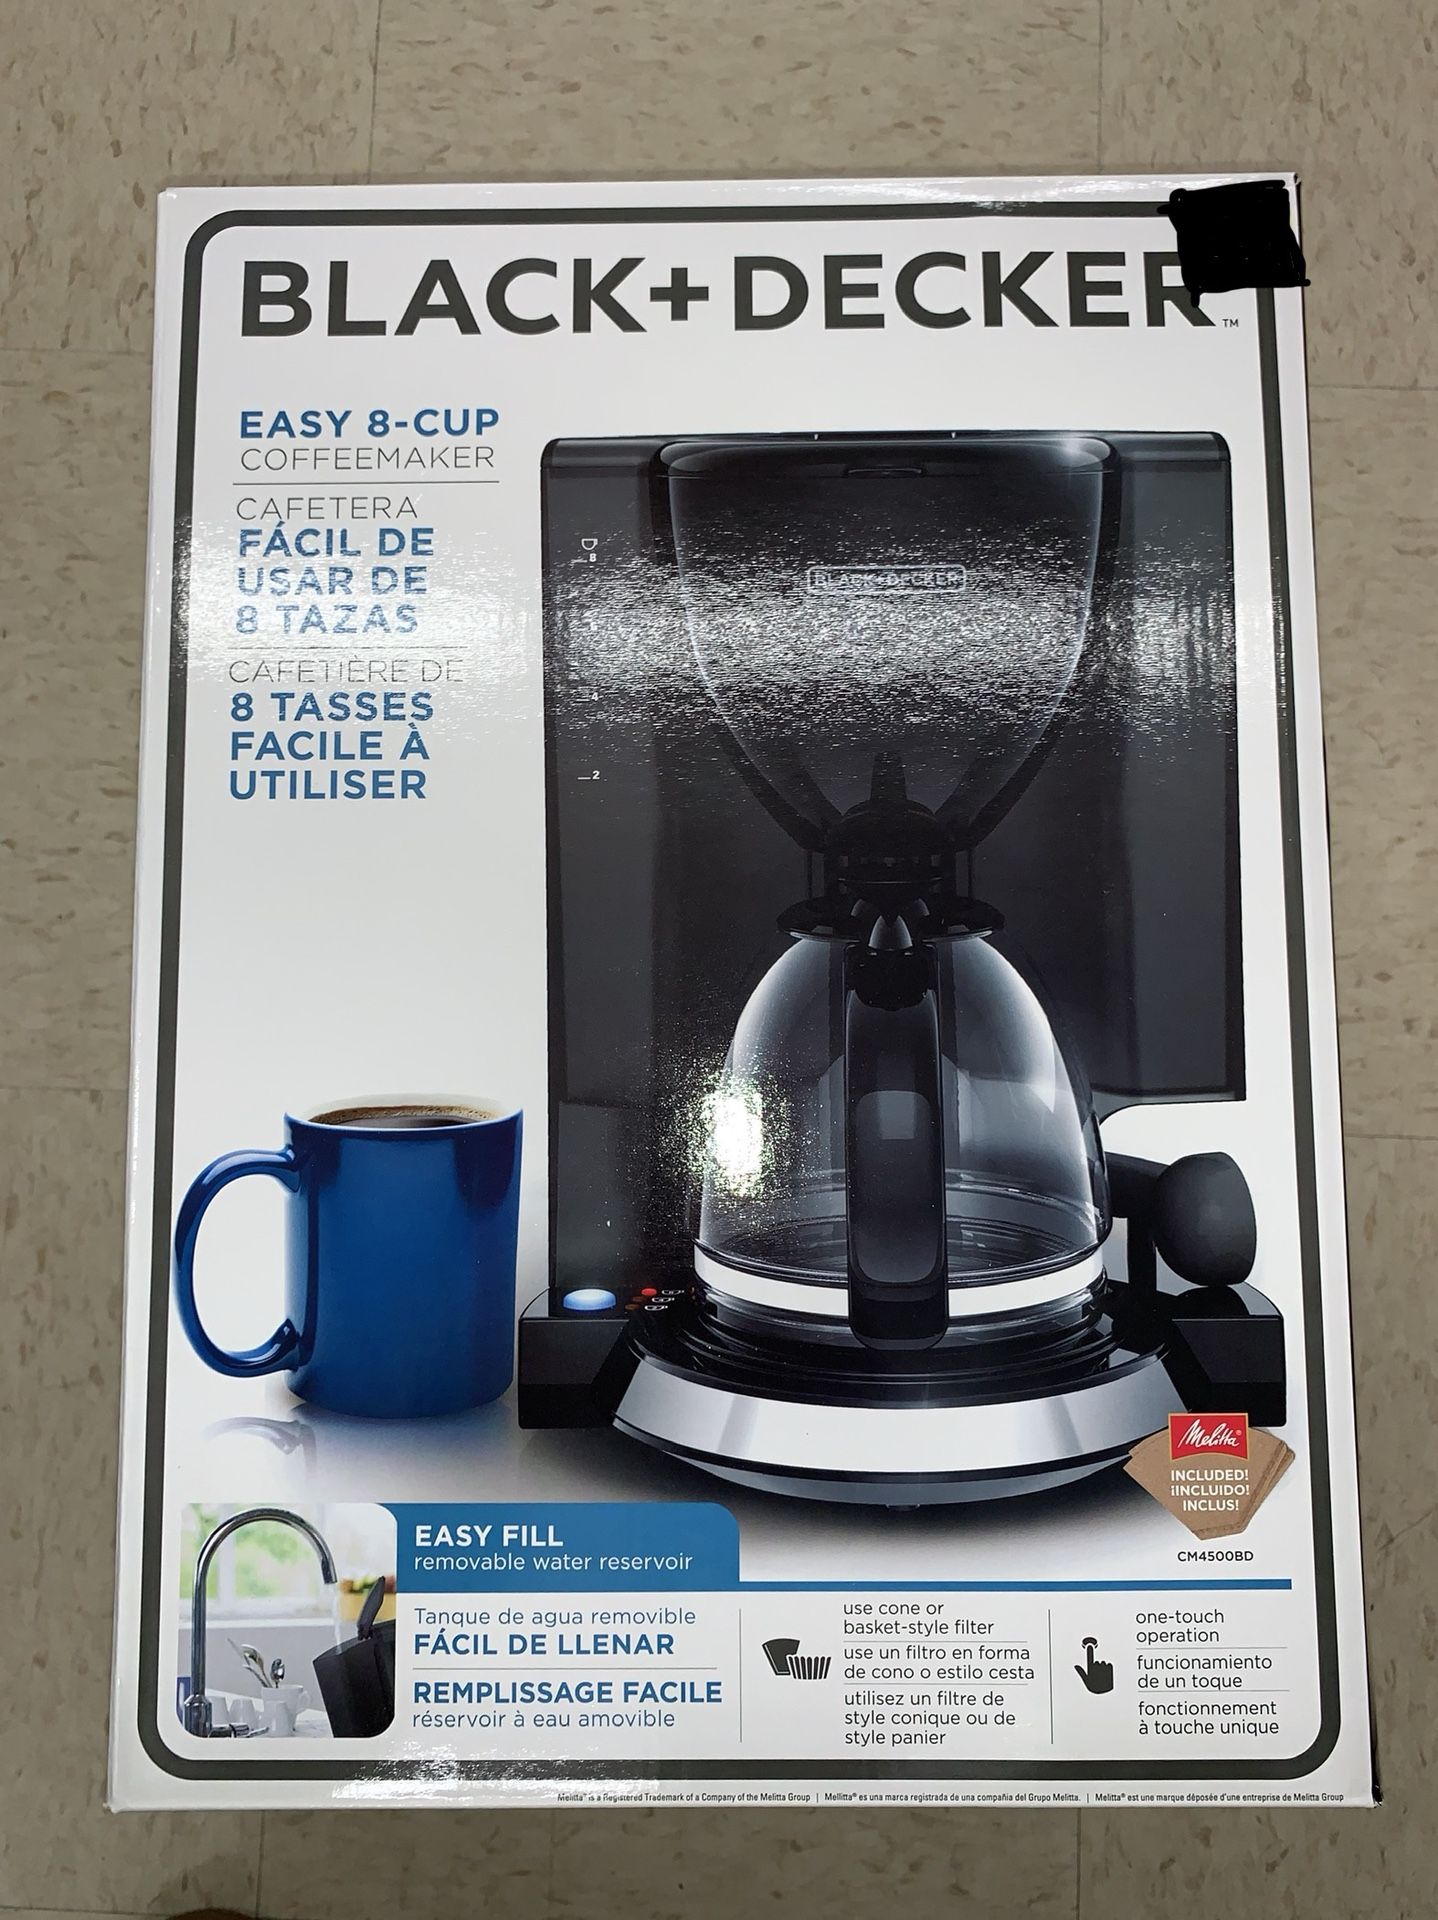 8 CUP COFFEE MAKER